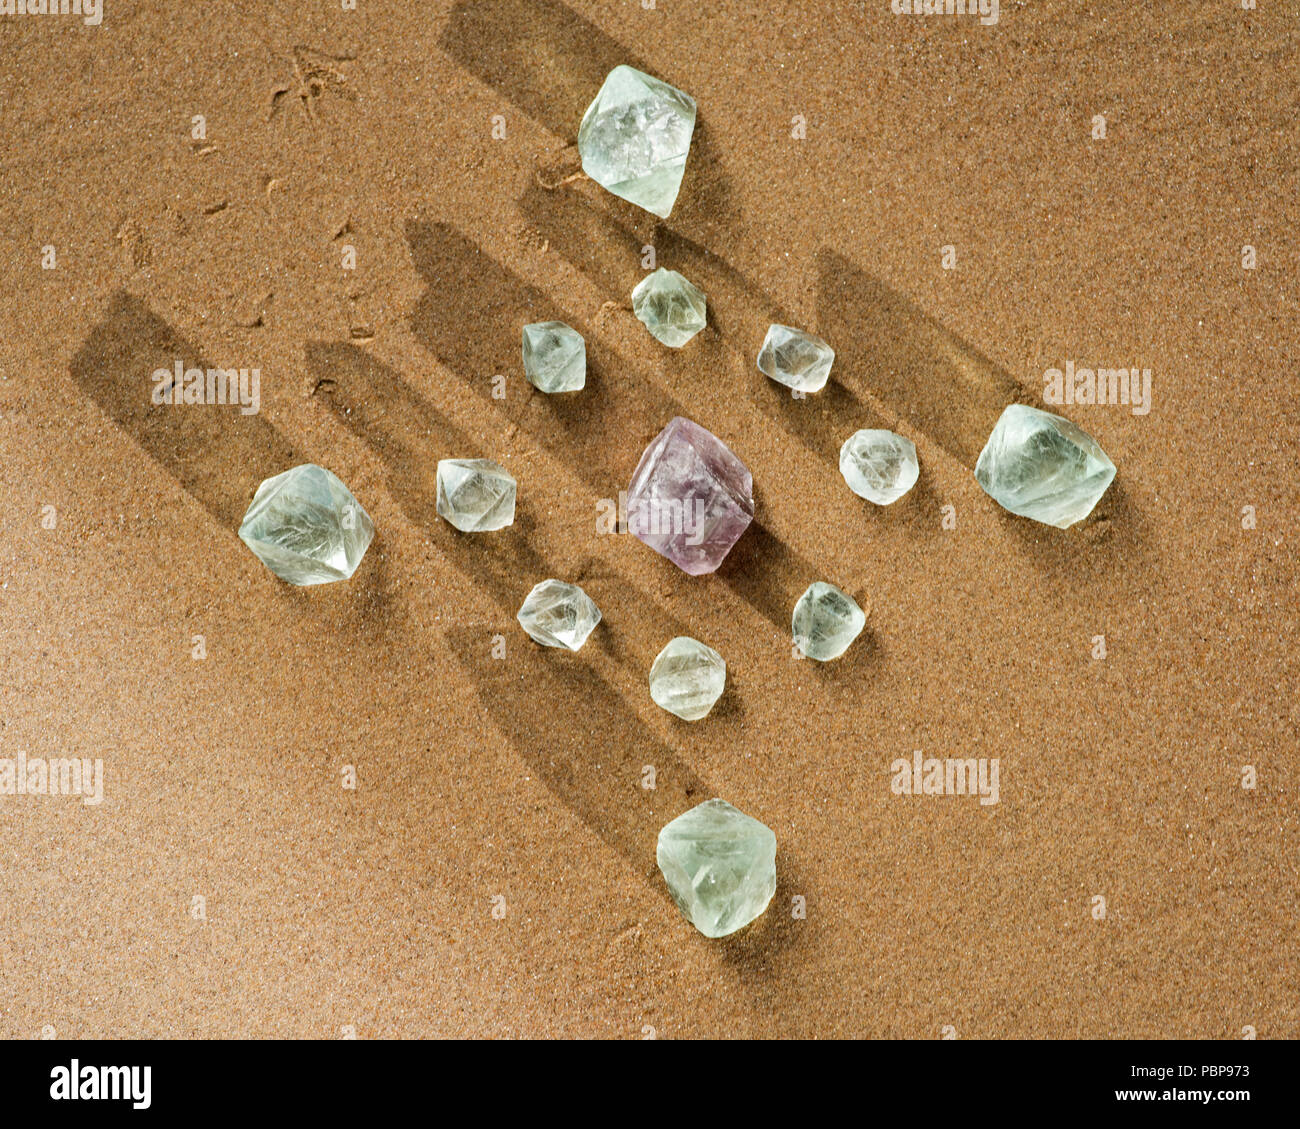 Crystal grid with Purple and Green Fluorite Natural Octahedron Crystals on the beach at sunrise. Stock Photo